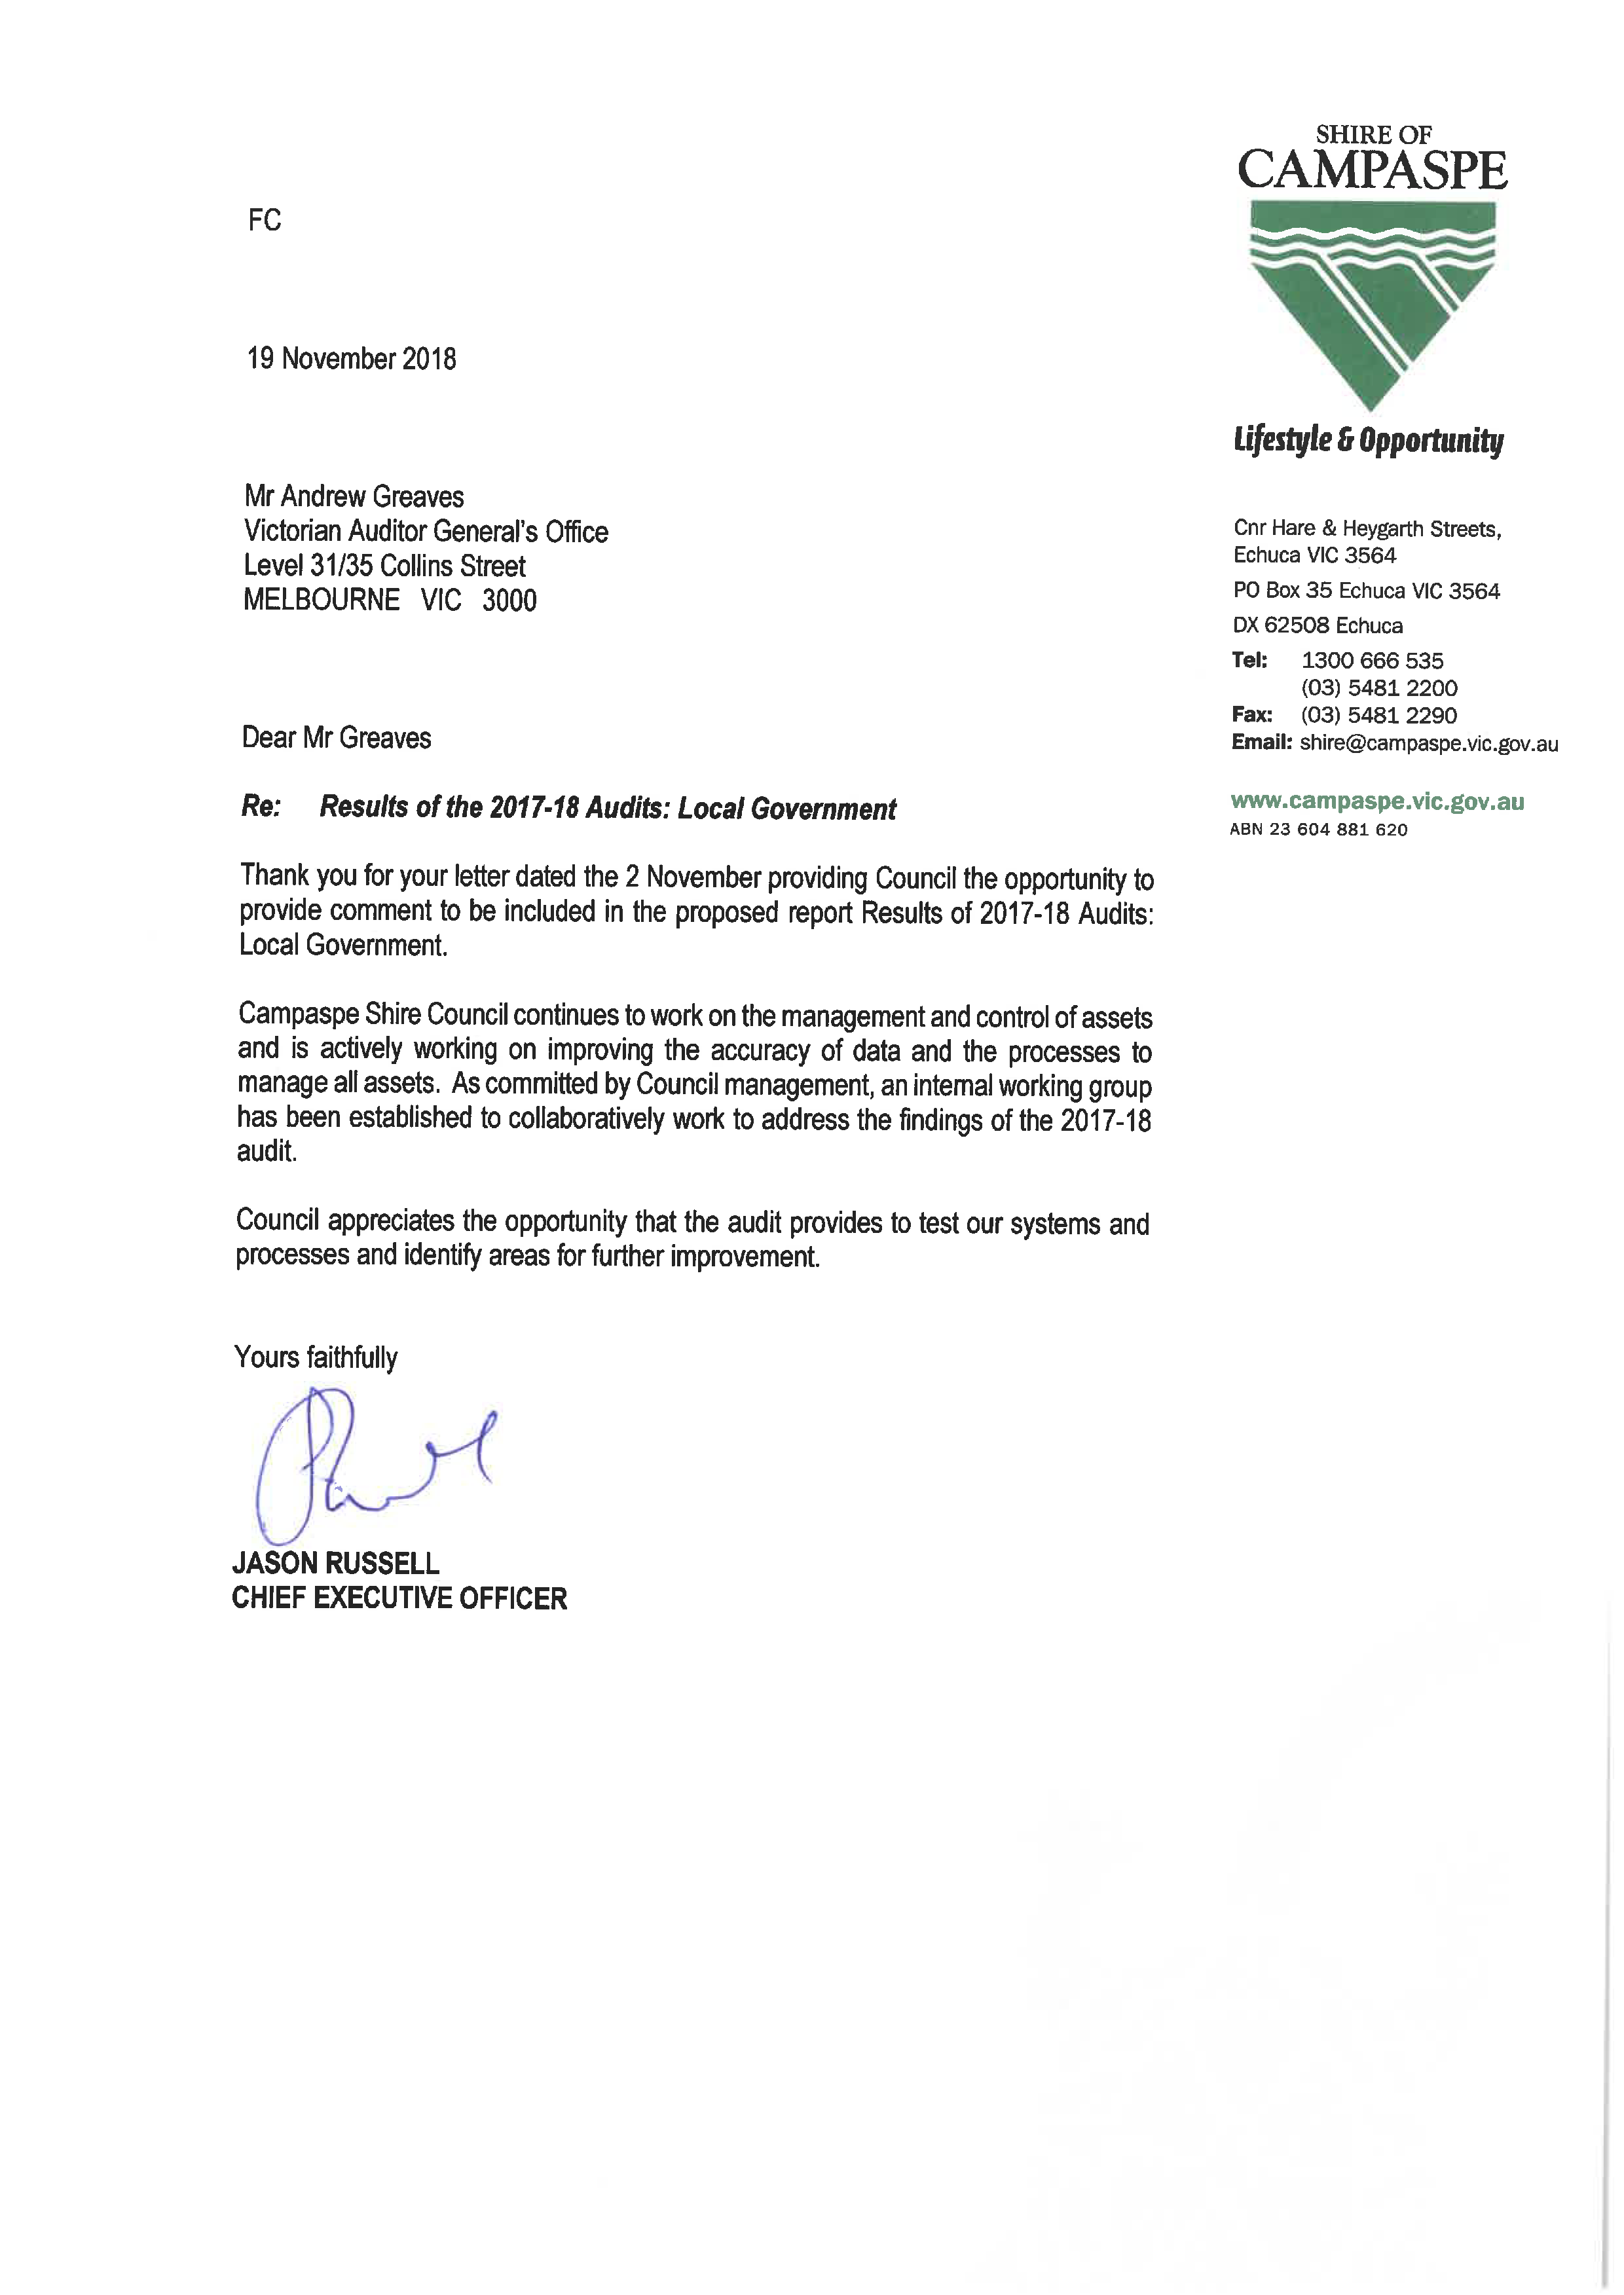 RESPONSE provided by the Chief Executive Officer, Campaspe Shire Council